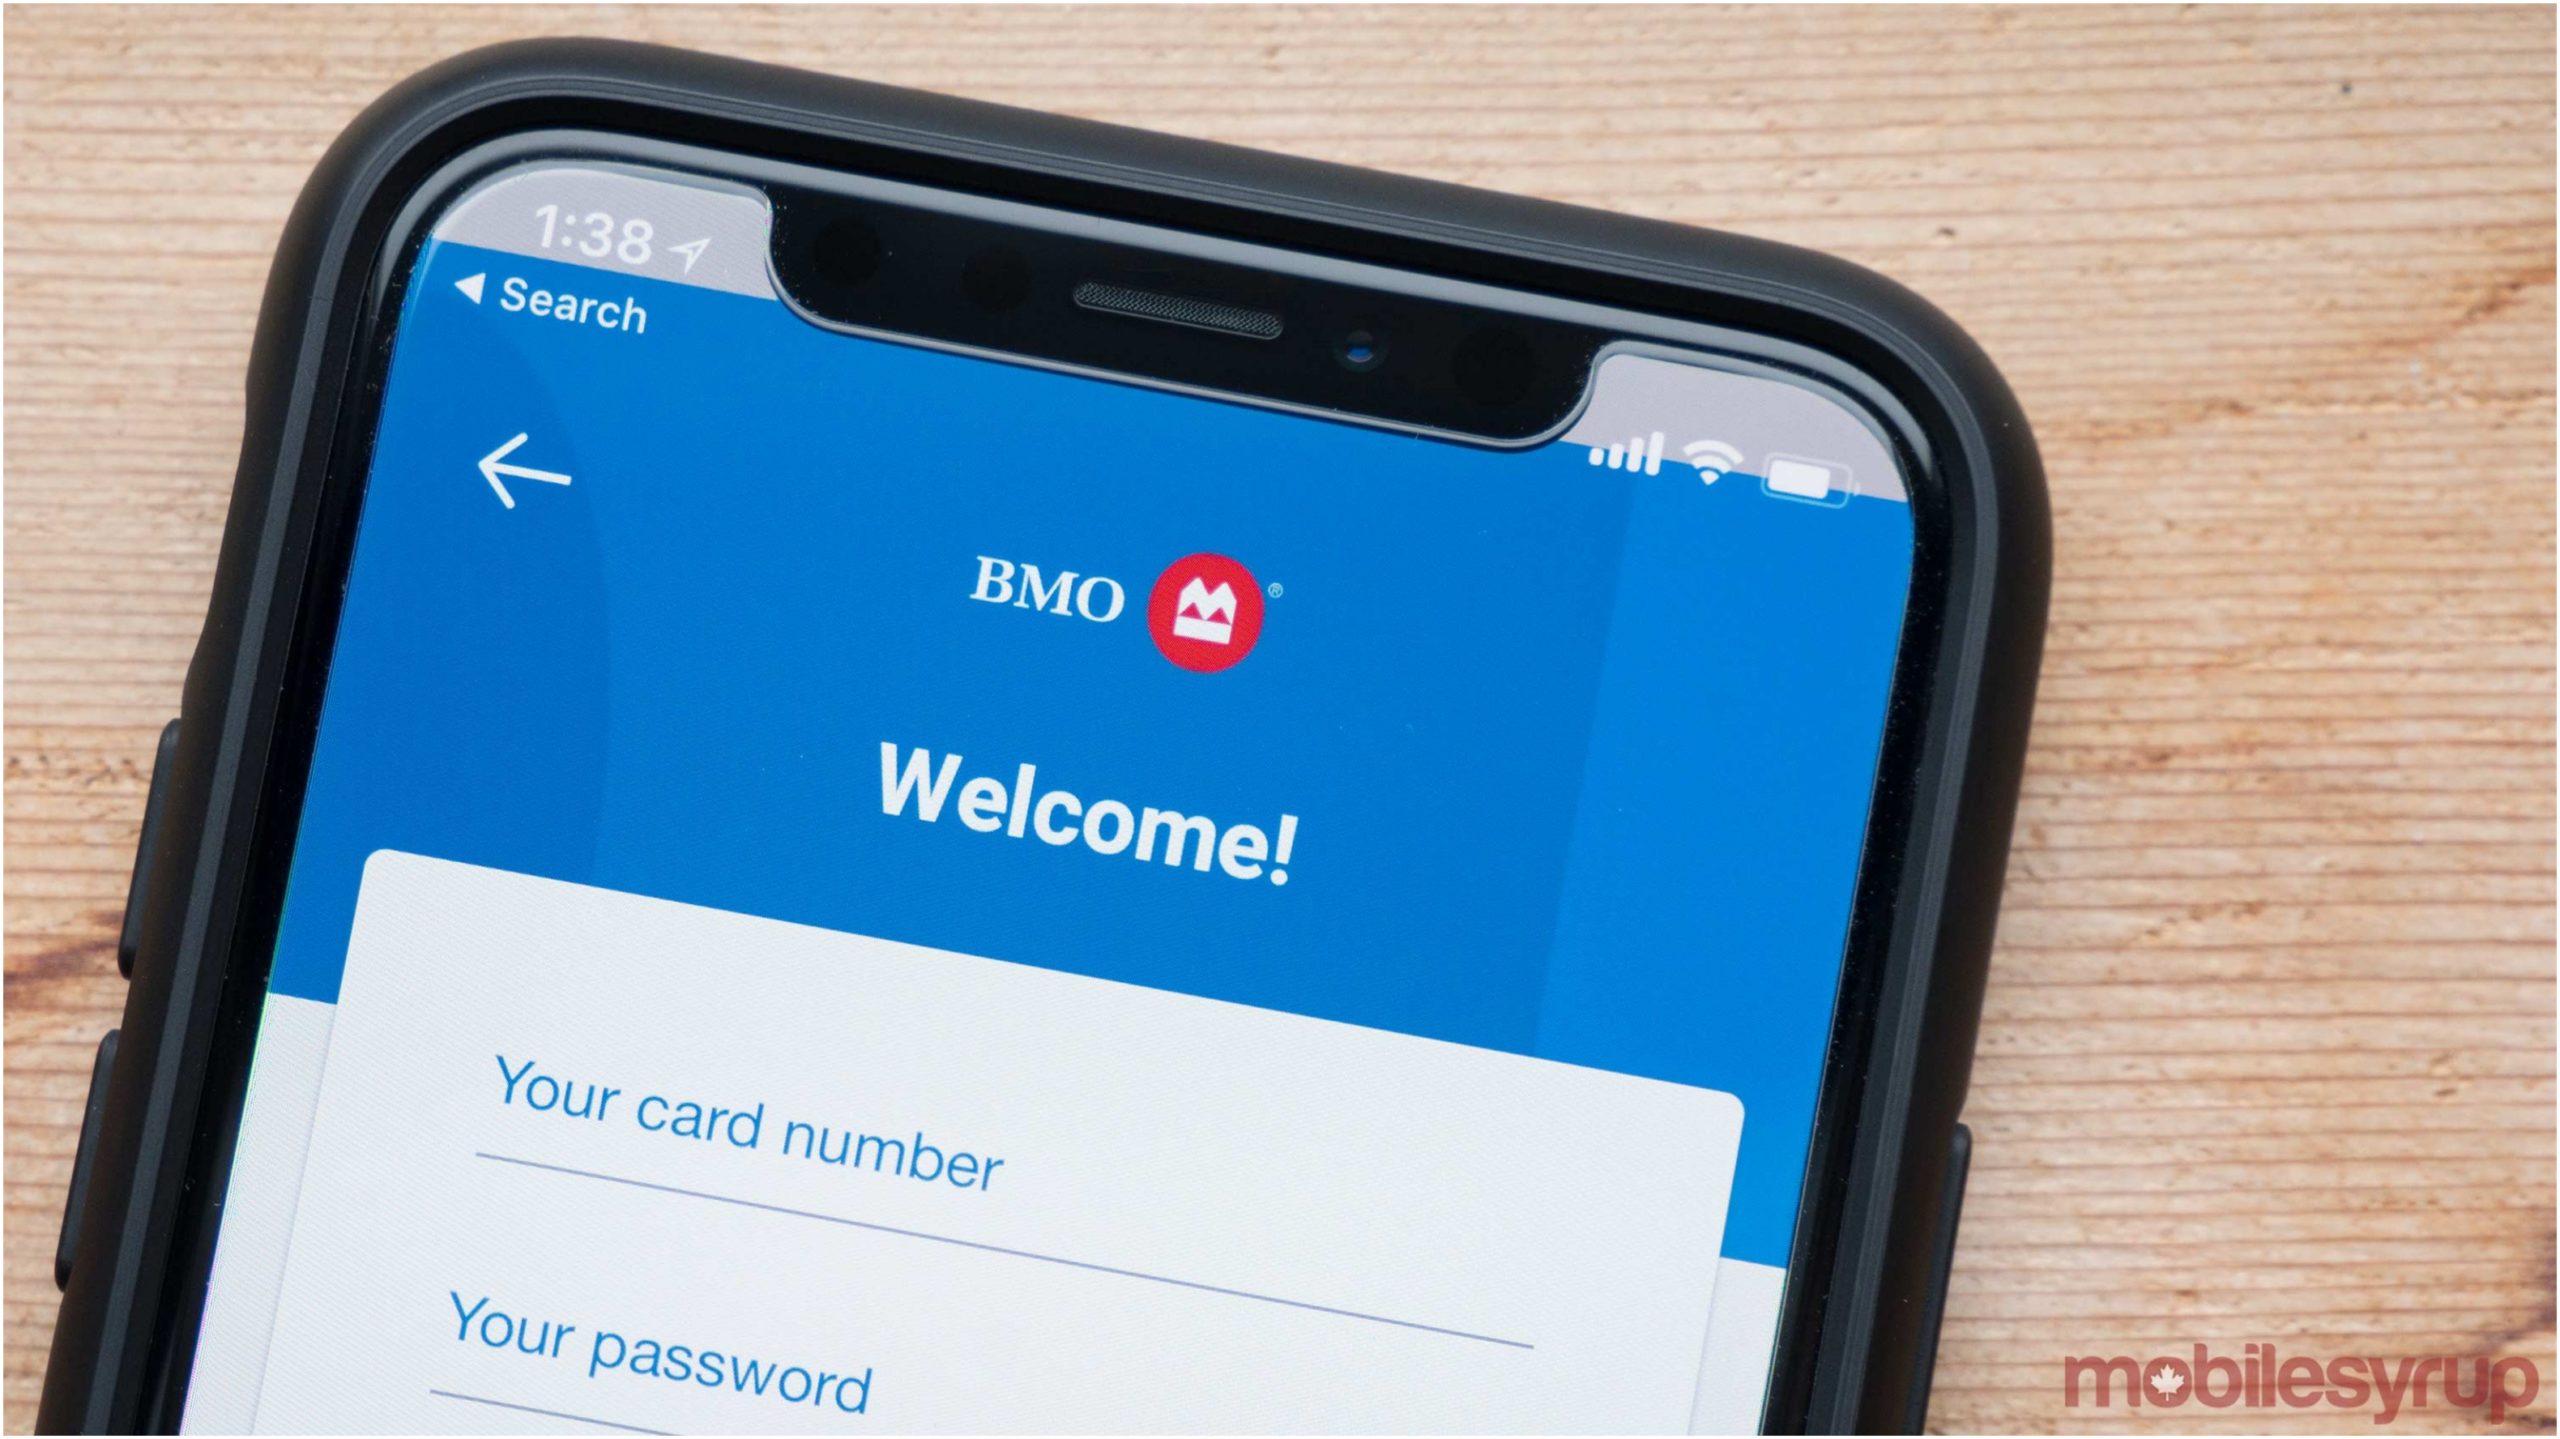 Bmo App Now Lets Customers Change And Reset Their Credit Card Pin Mobilesyrup